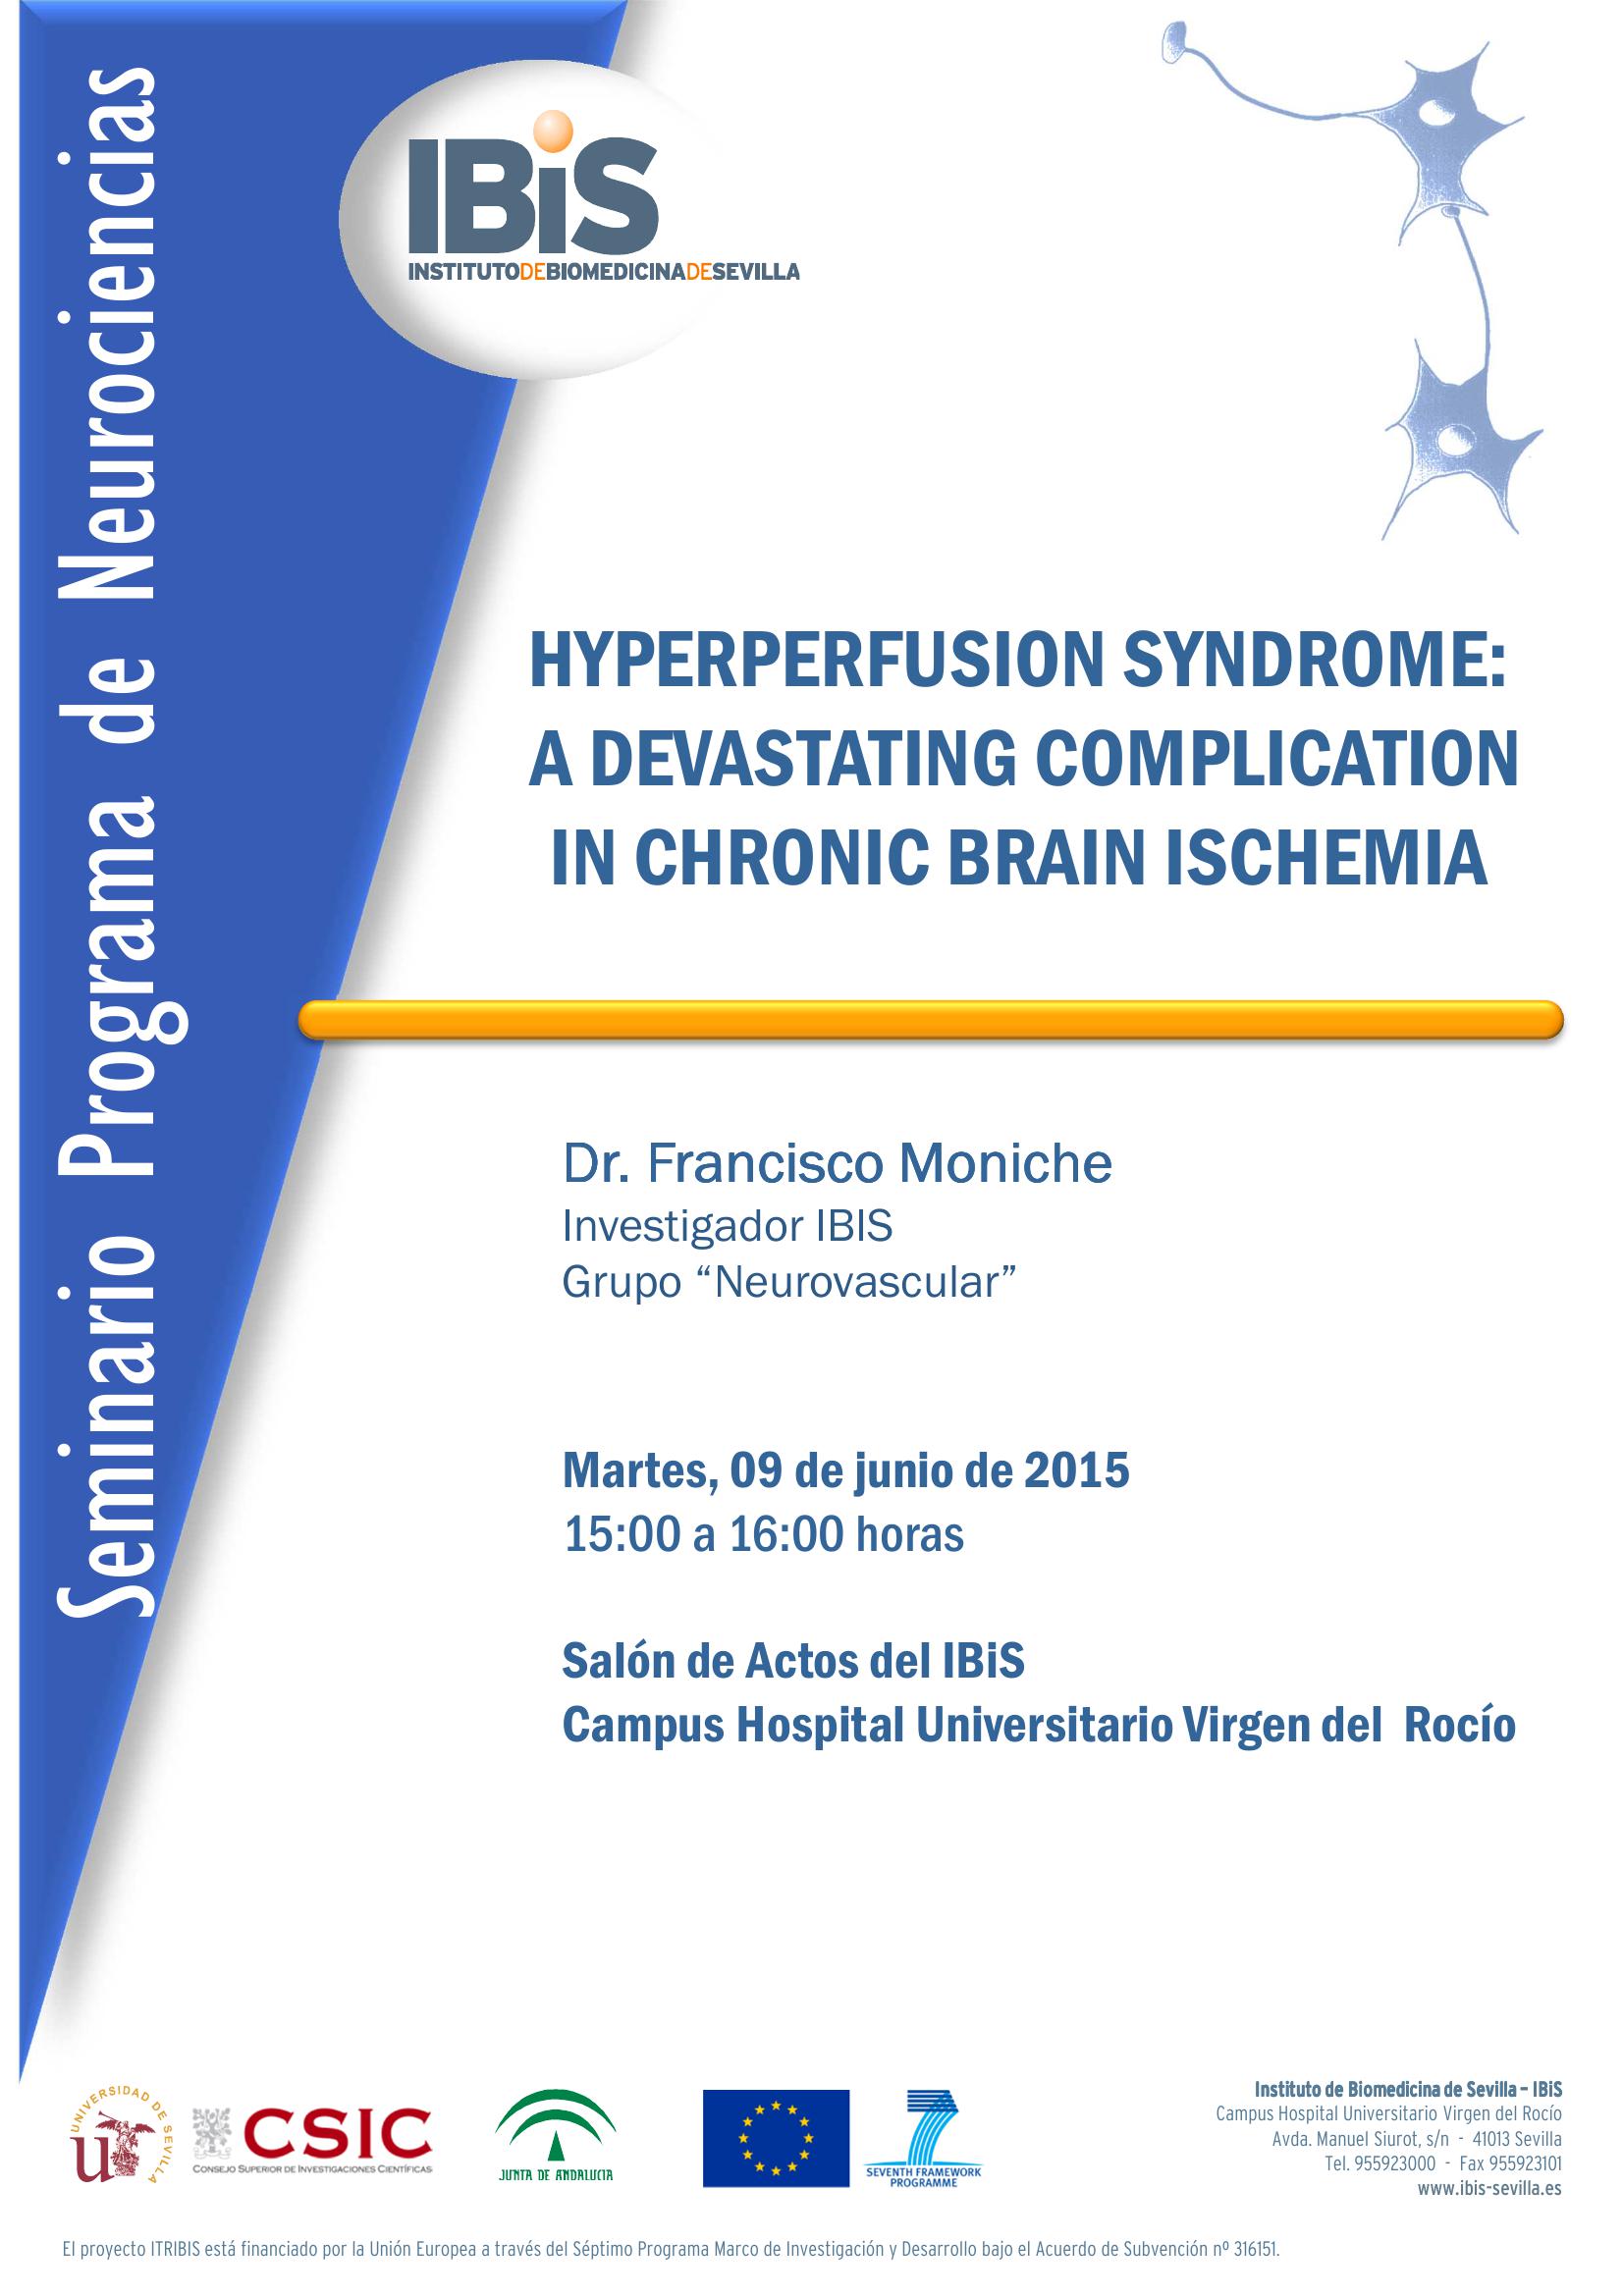 Poster: HYPERPERFUSION SYNDROME: A DEVASTATING COMPLICATION IN CHRONIC BRAIN ISCHEMIA